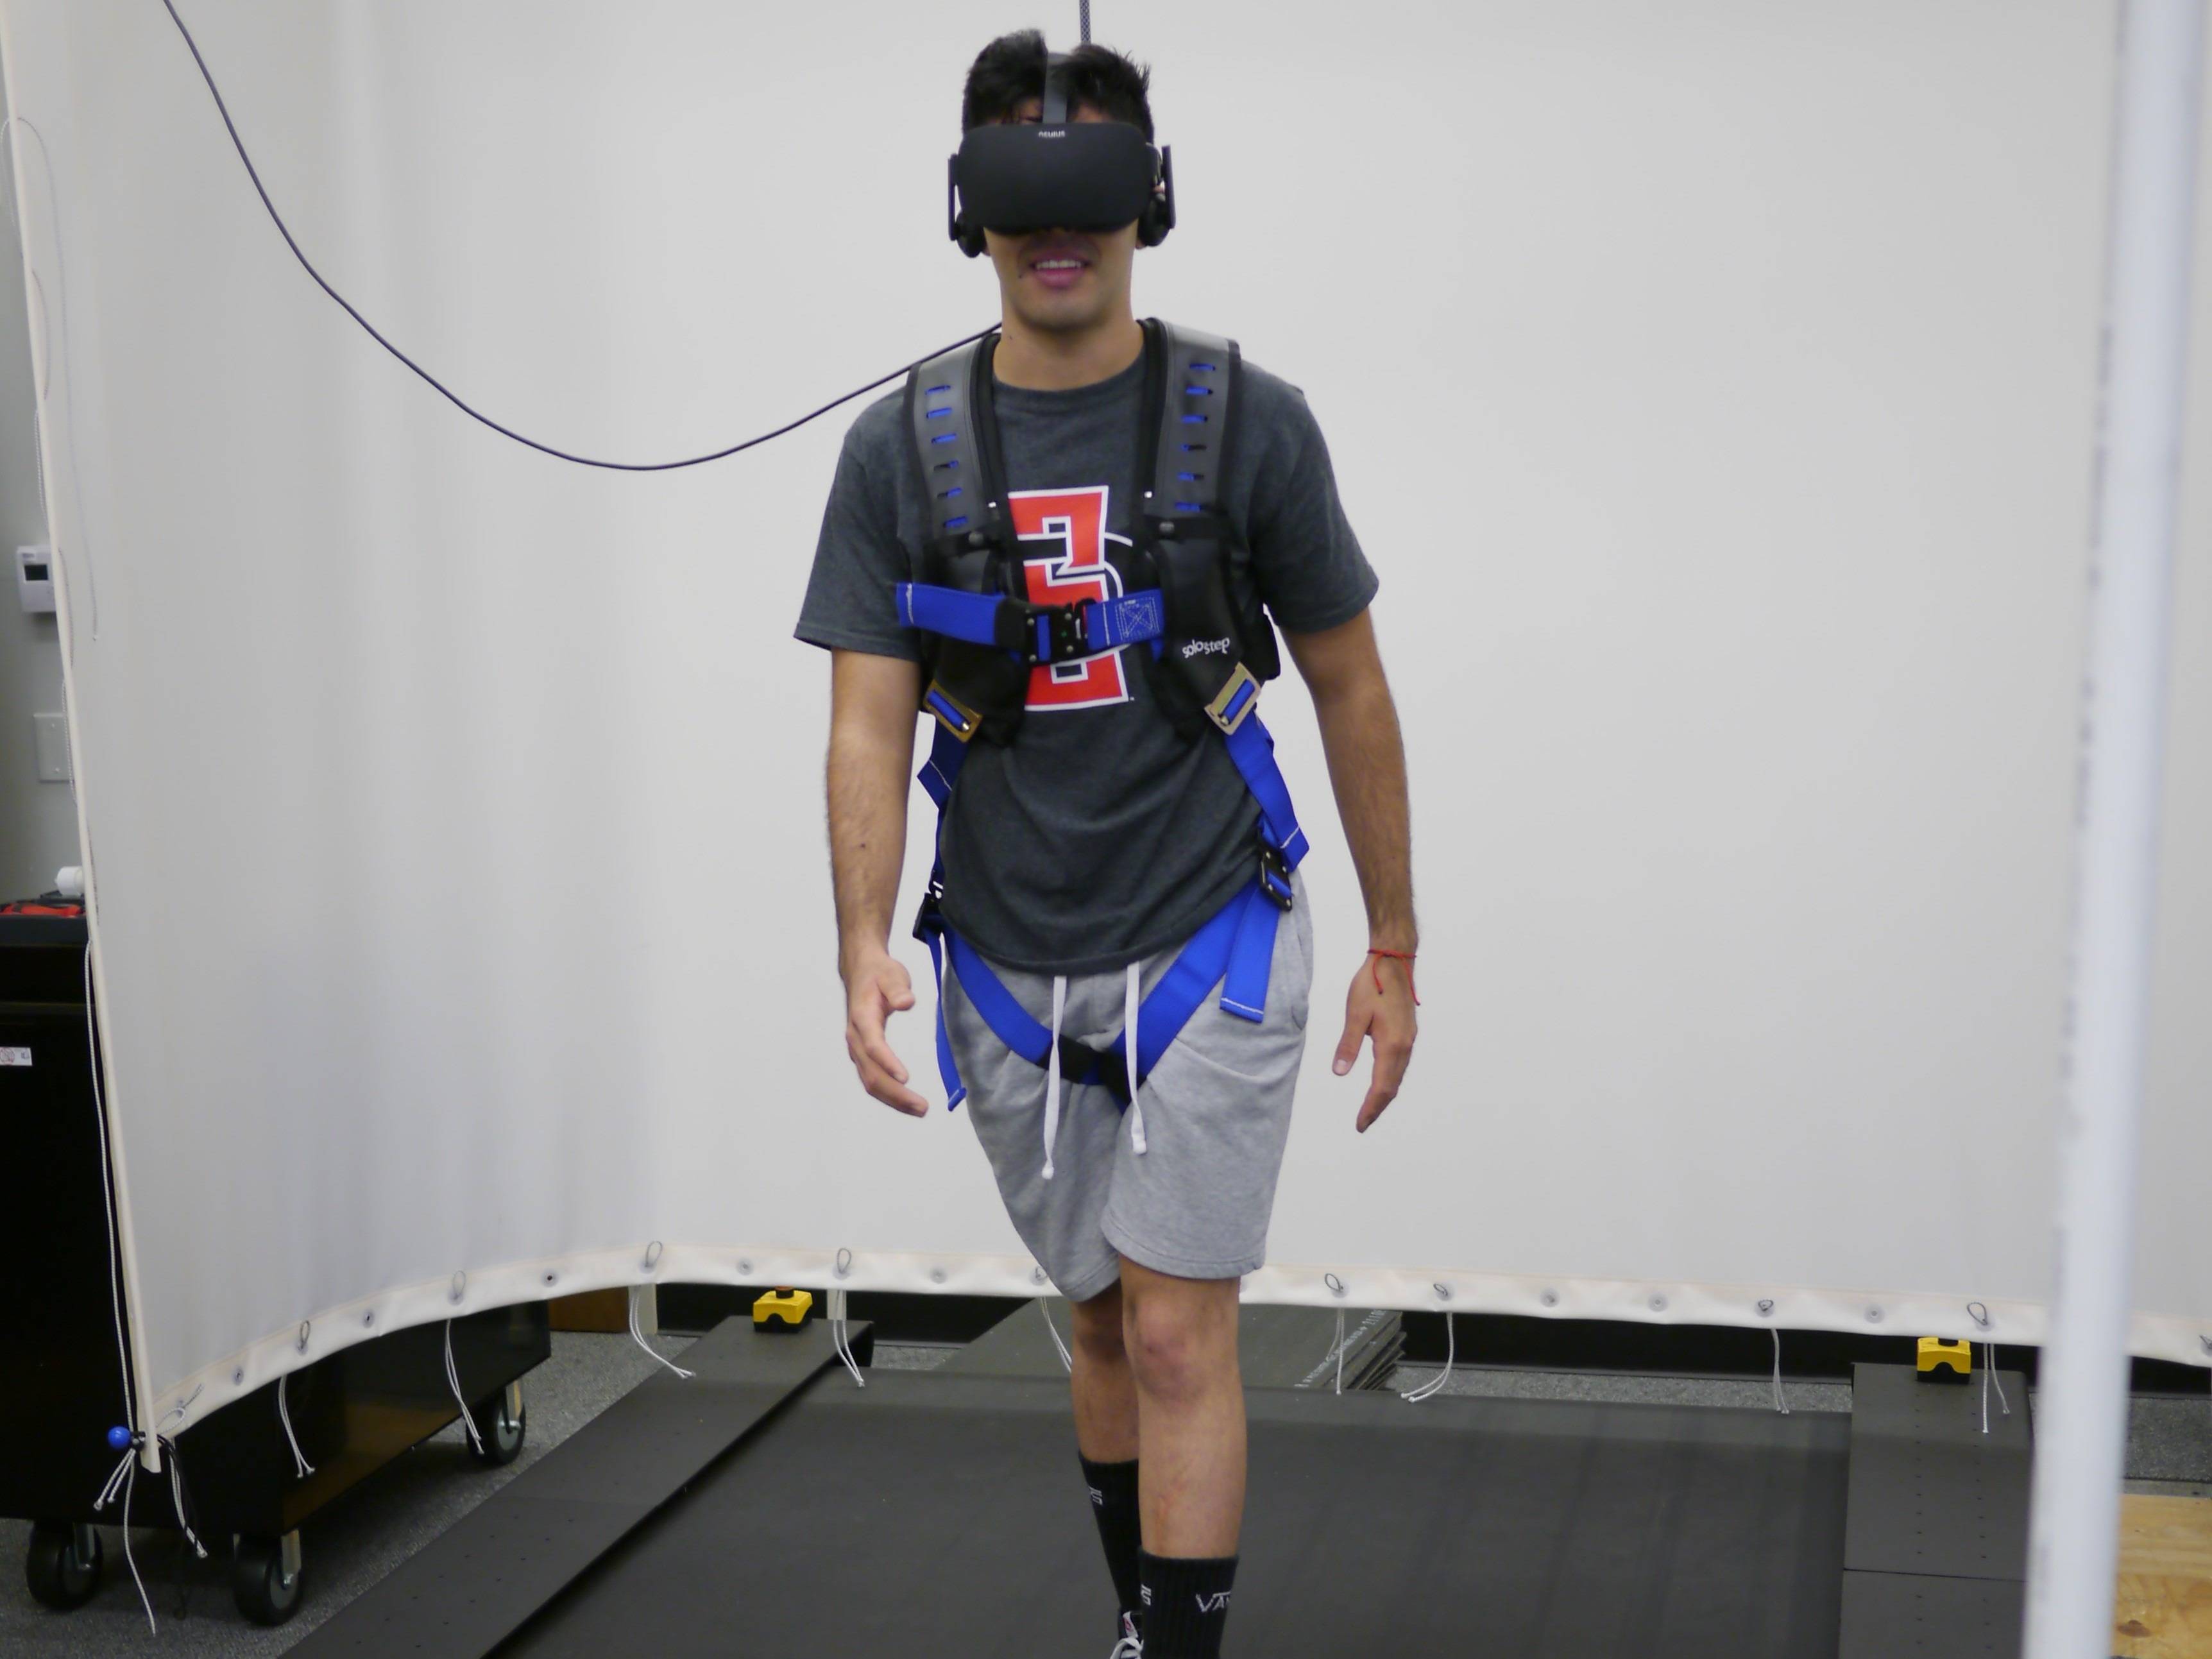 ENS Student walking on treadmill with VR